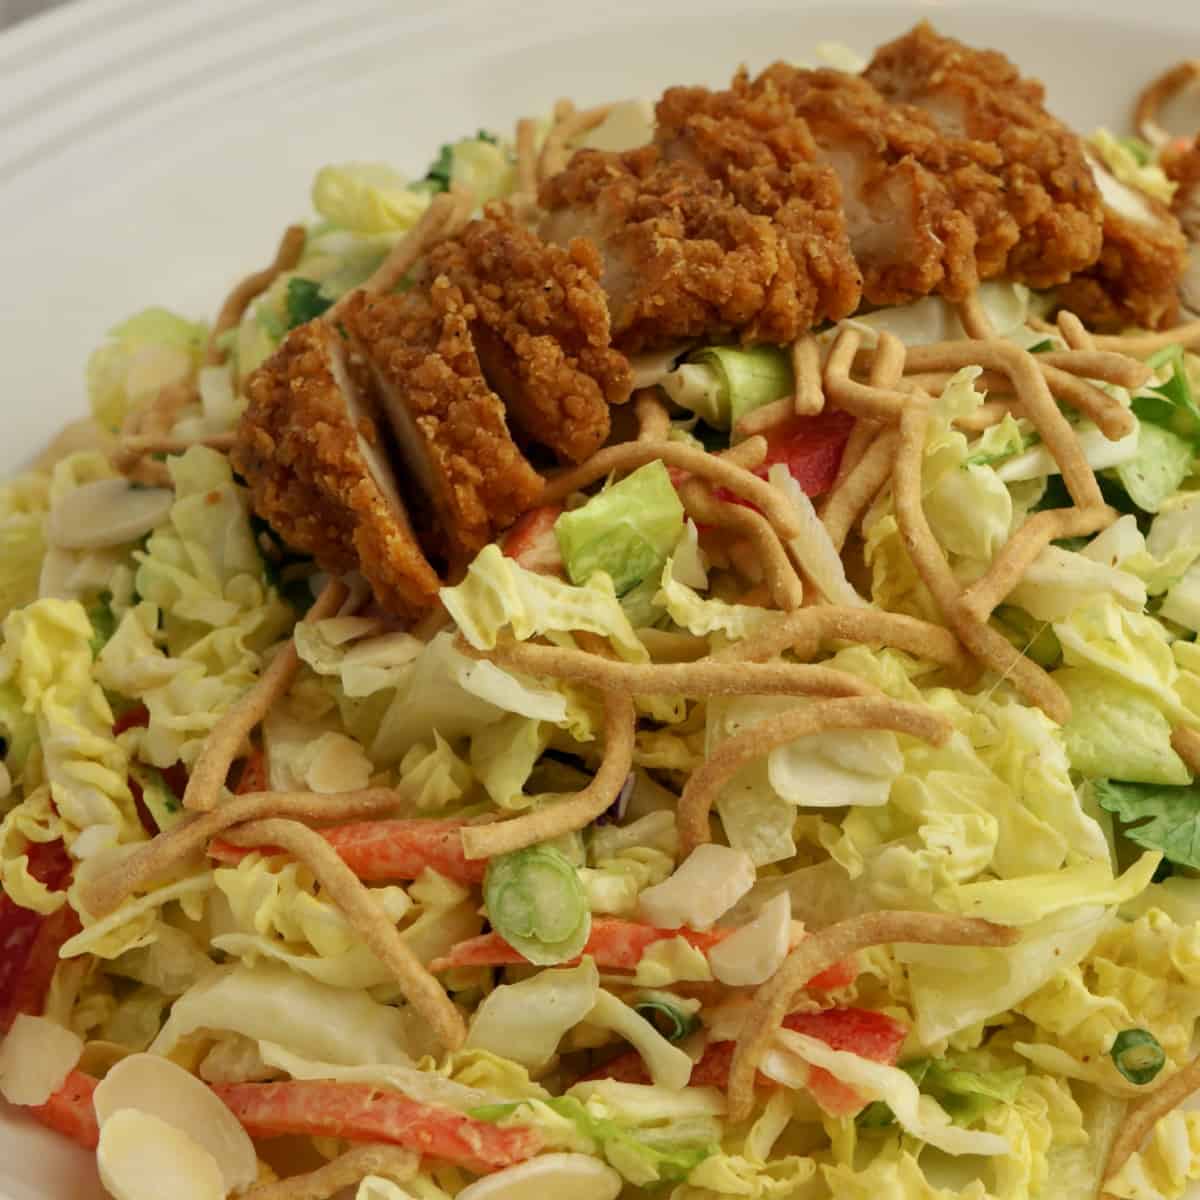 Crispy fried chicken slices on a tasty salad with fresh peppers and Chinese noodles.